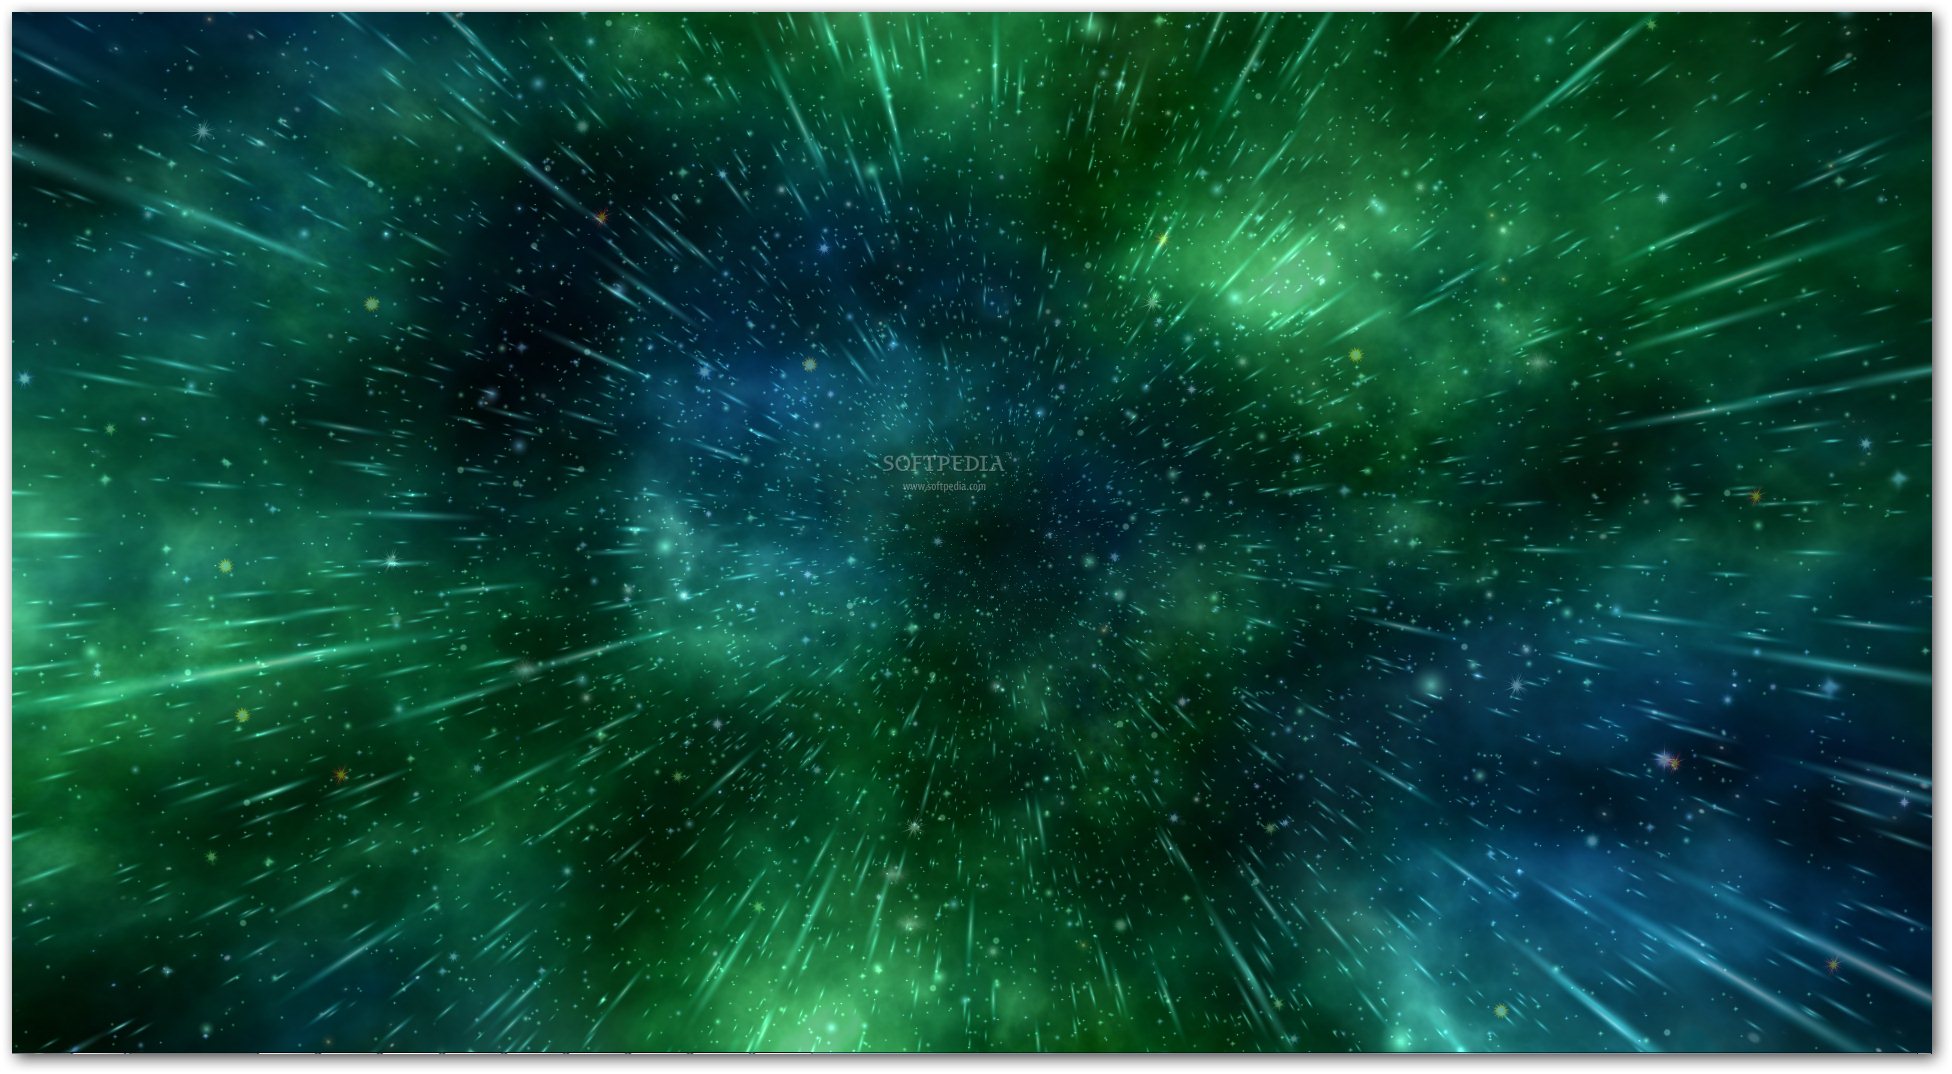 Beautiful Space 3d Animated Wallpaper Screensaver This